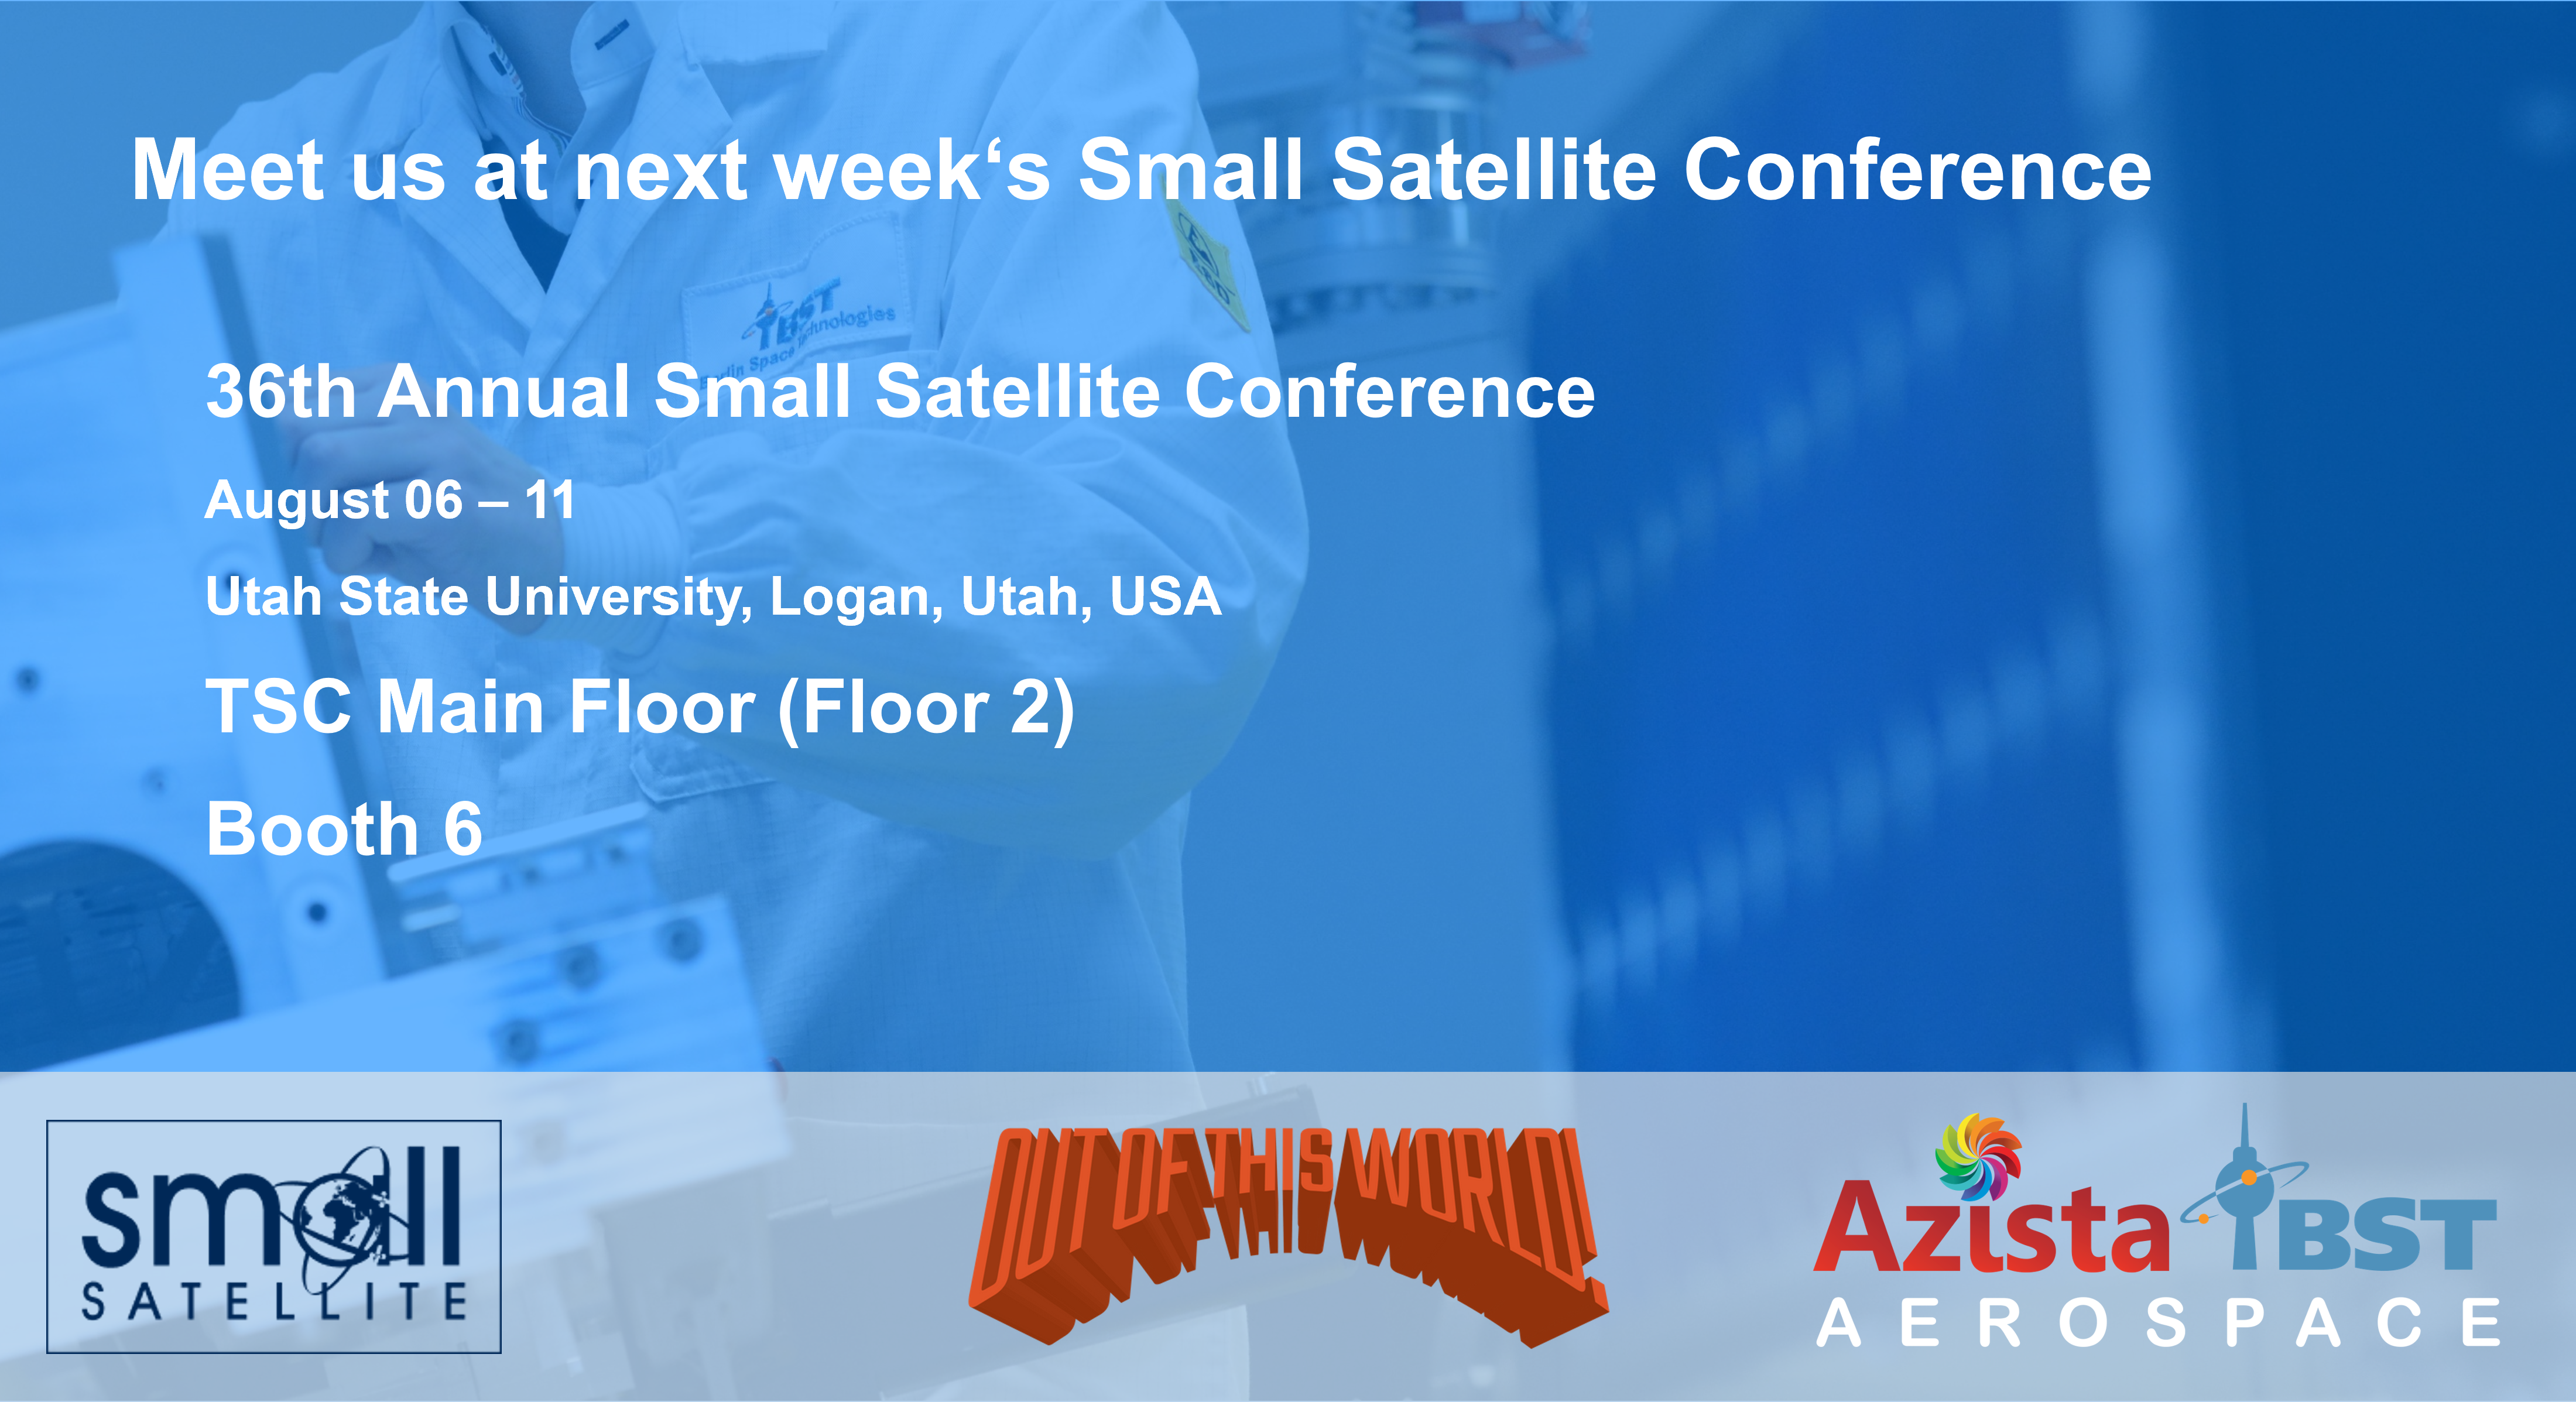 Azista BST Aerospace at Small Satellite Conference